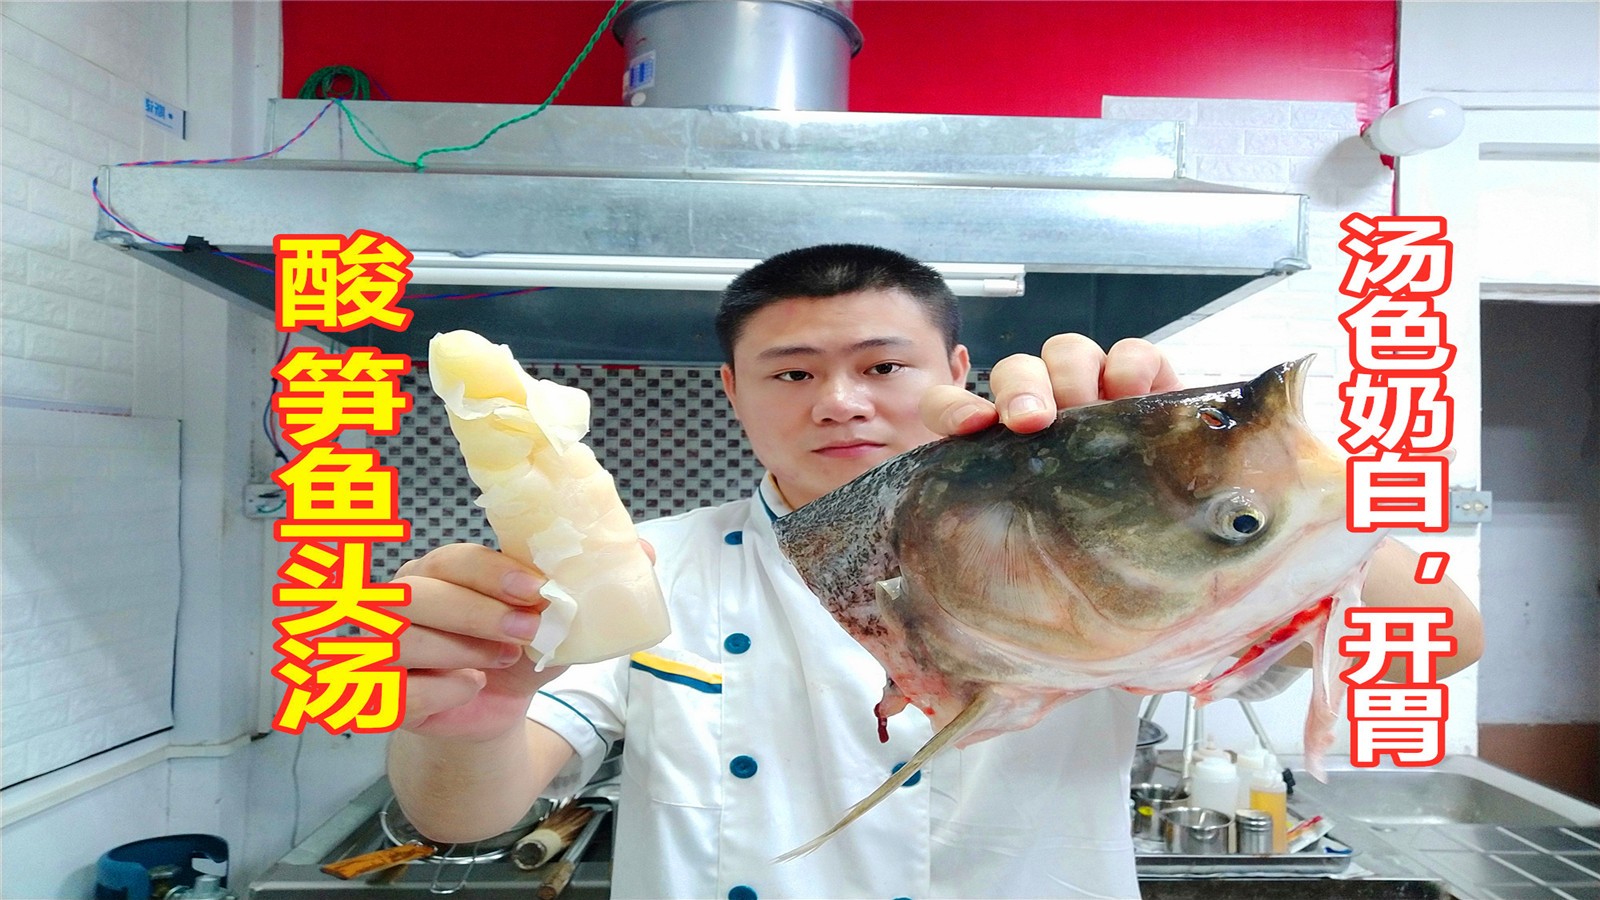 The chef shares the practice of sour bamboo shoots and fish head soup! Soup white, fresh, appetizing! Have a little skill!